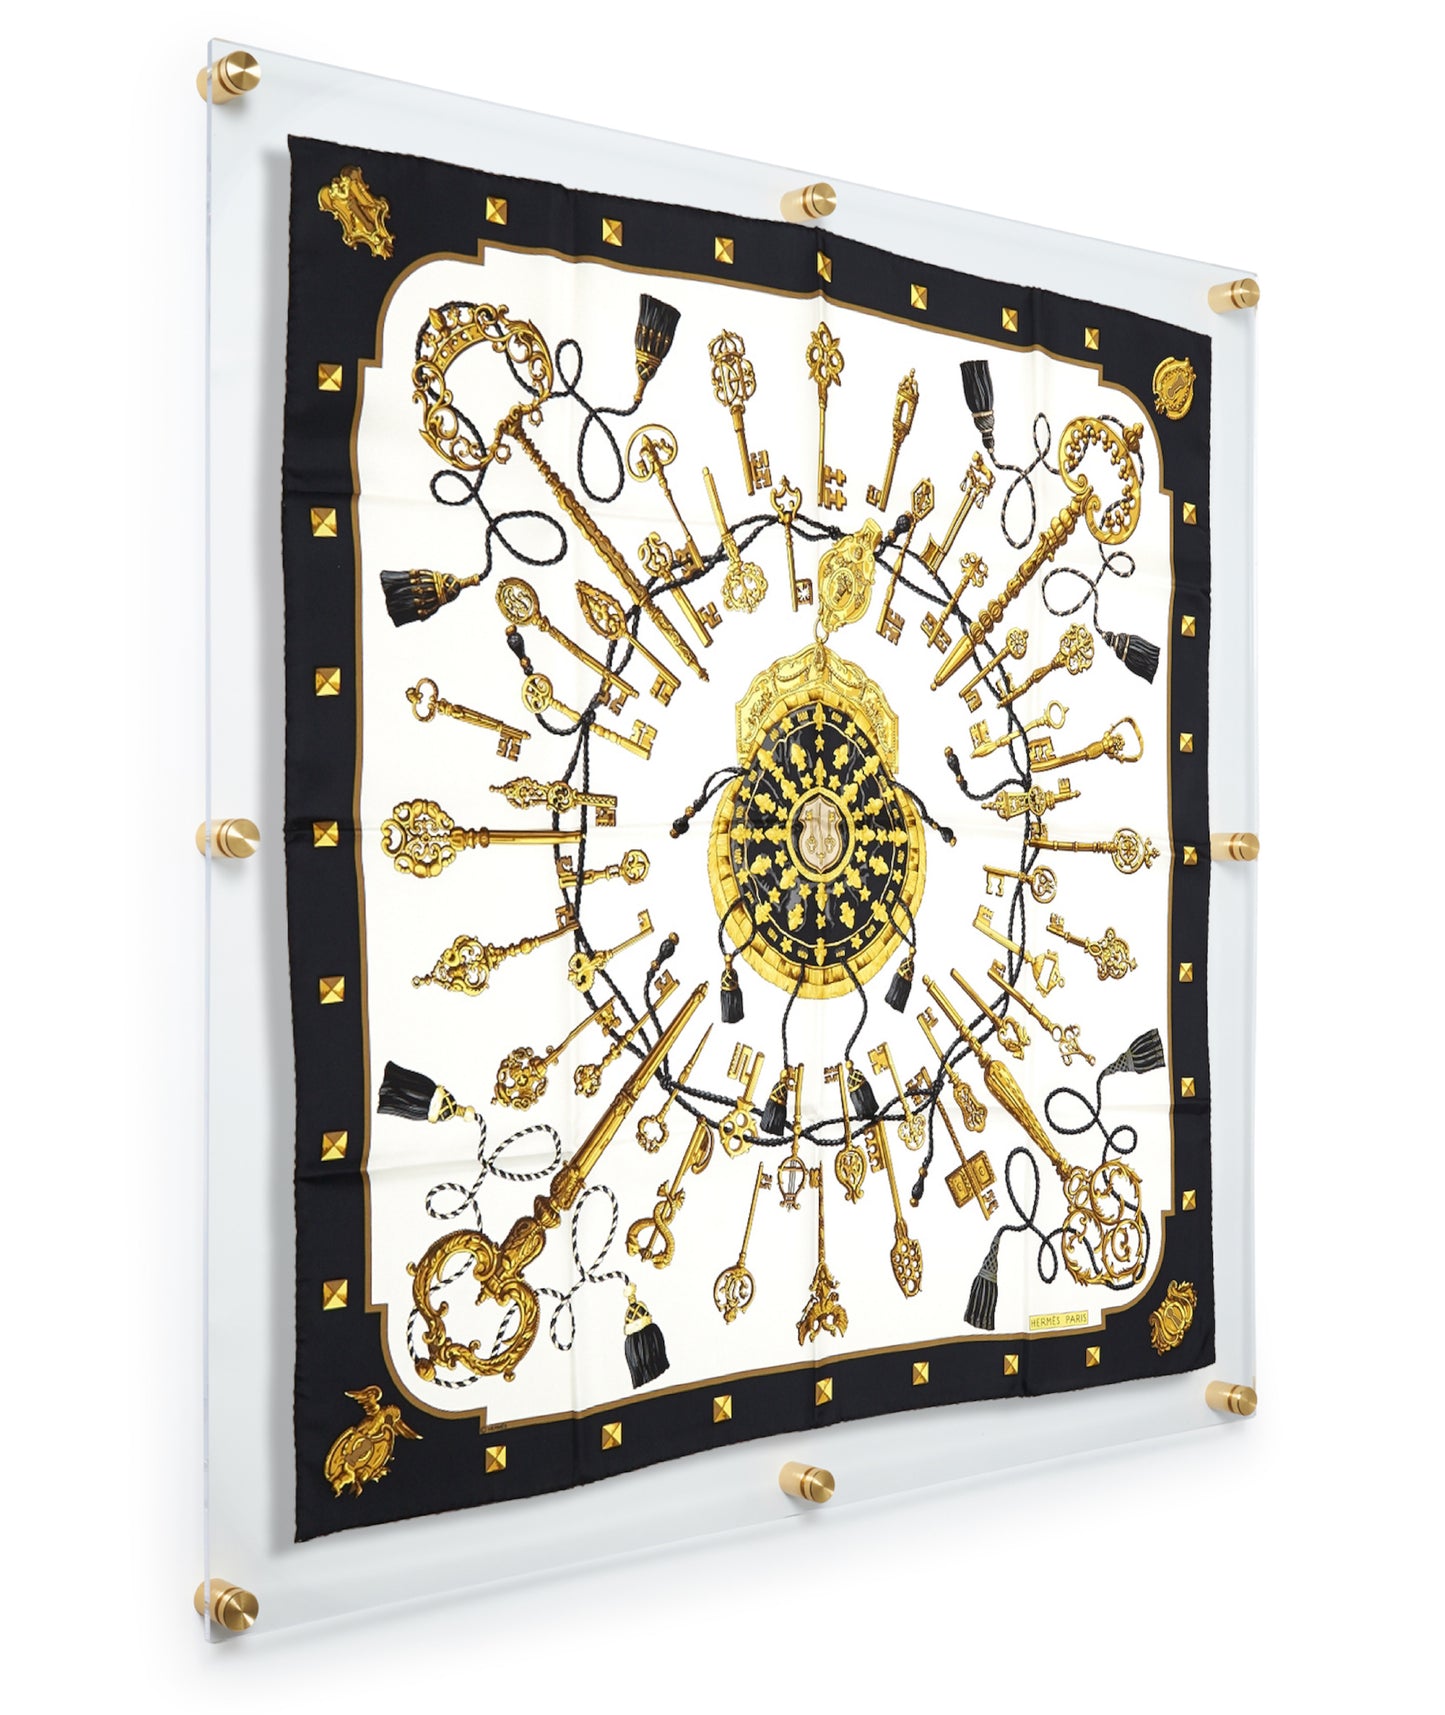 Shop for Mom! Scarf Frame (For 34x34" or 36x36" Silk Scarves)